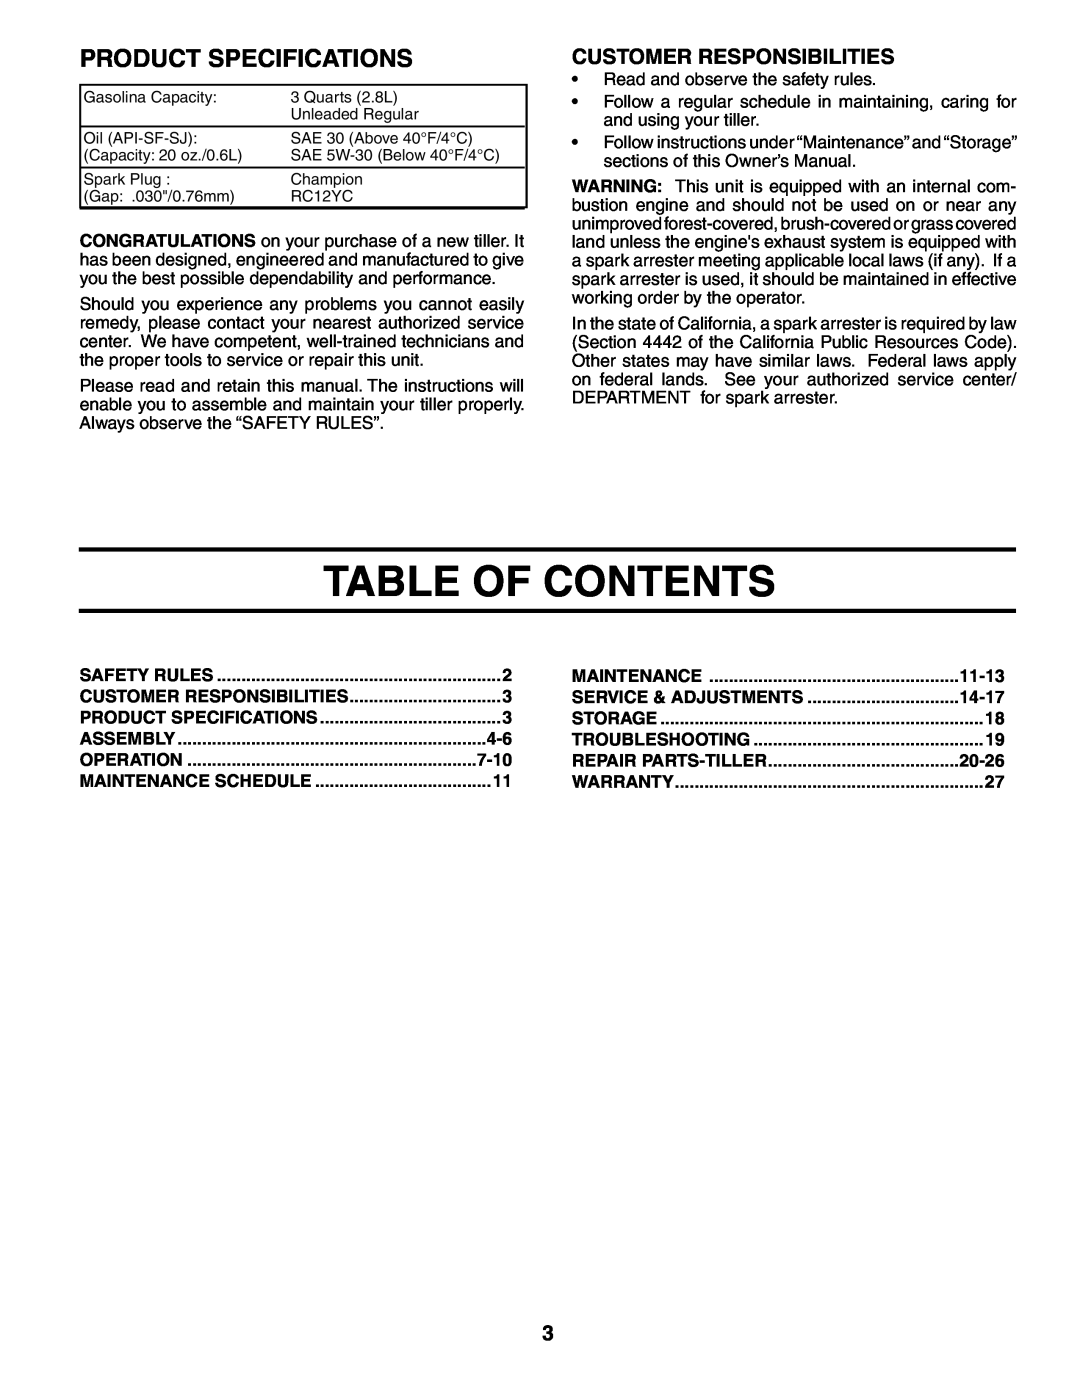 Poulan PRRT65C owner manual Table Of Contents, Product Specifications, Customer Responsibilities 